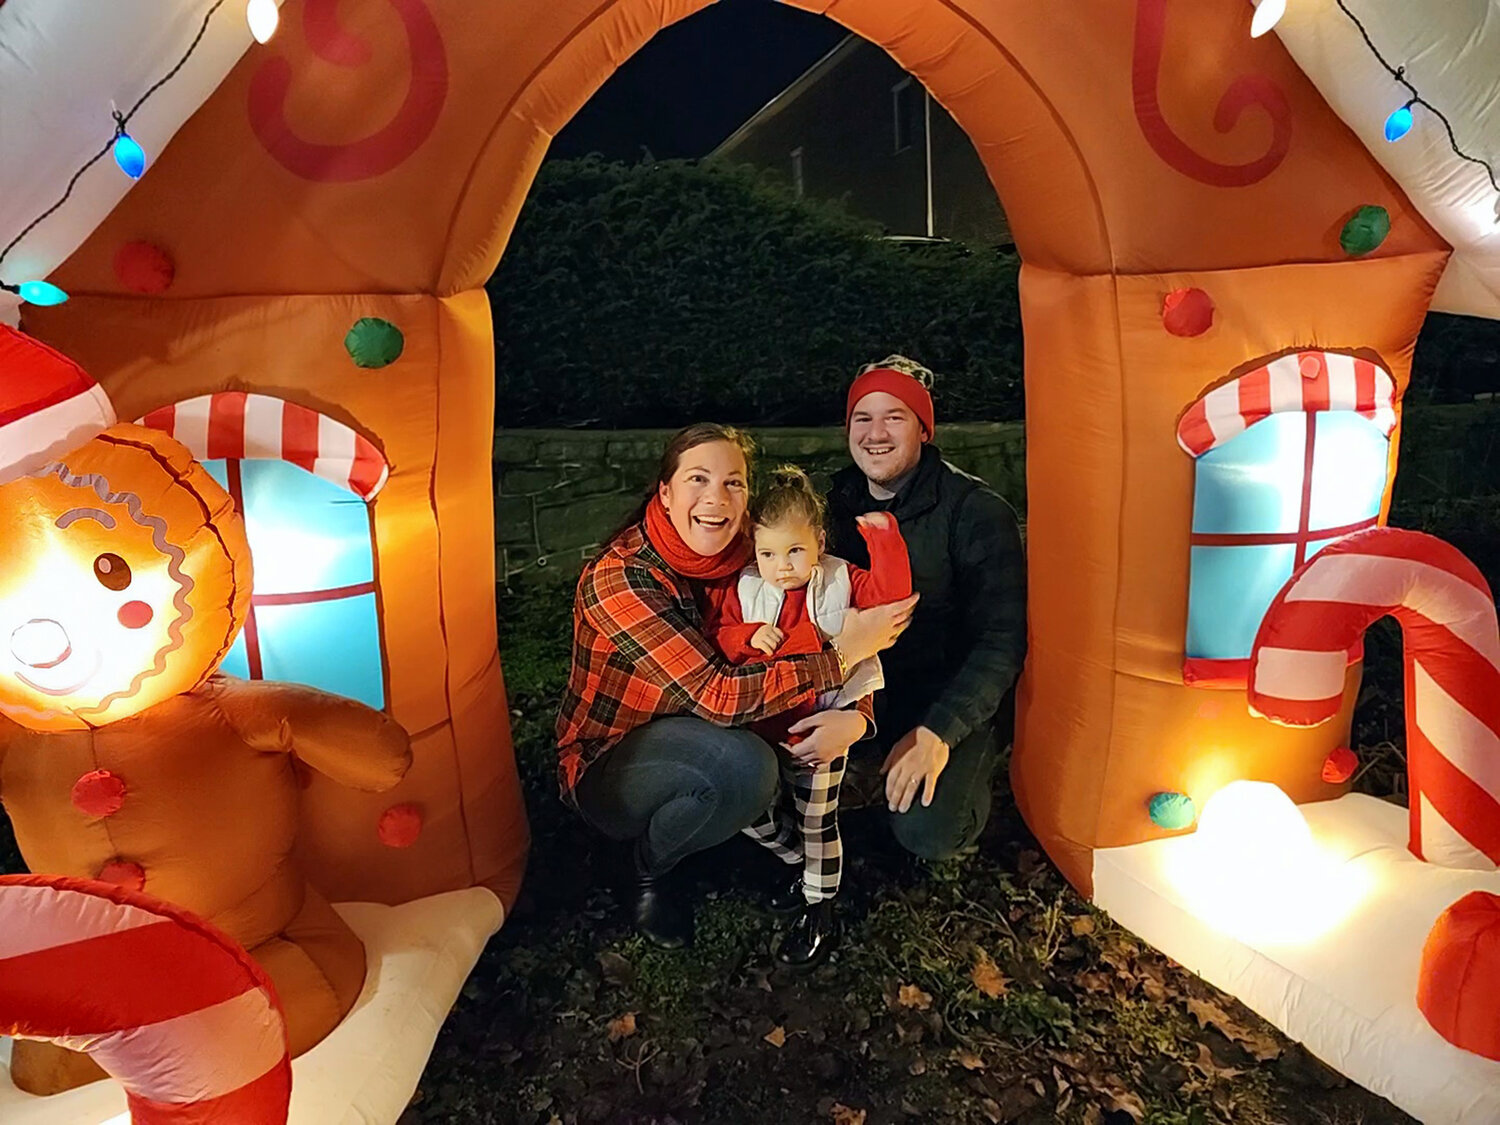 Gwen, Steve and Martha Bobeck, of Sellersville explore a festive inflatable at Saturday’s Perkasie Tree-Lighting Ceremony.